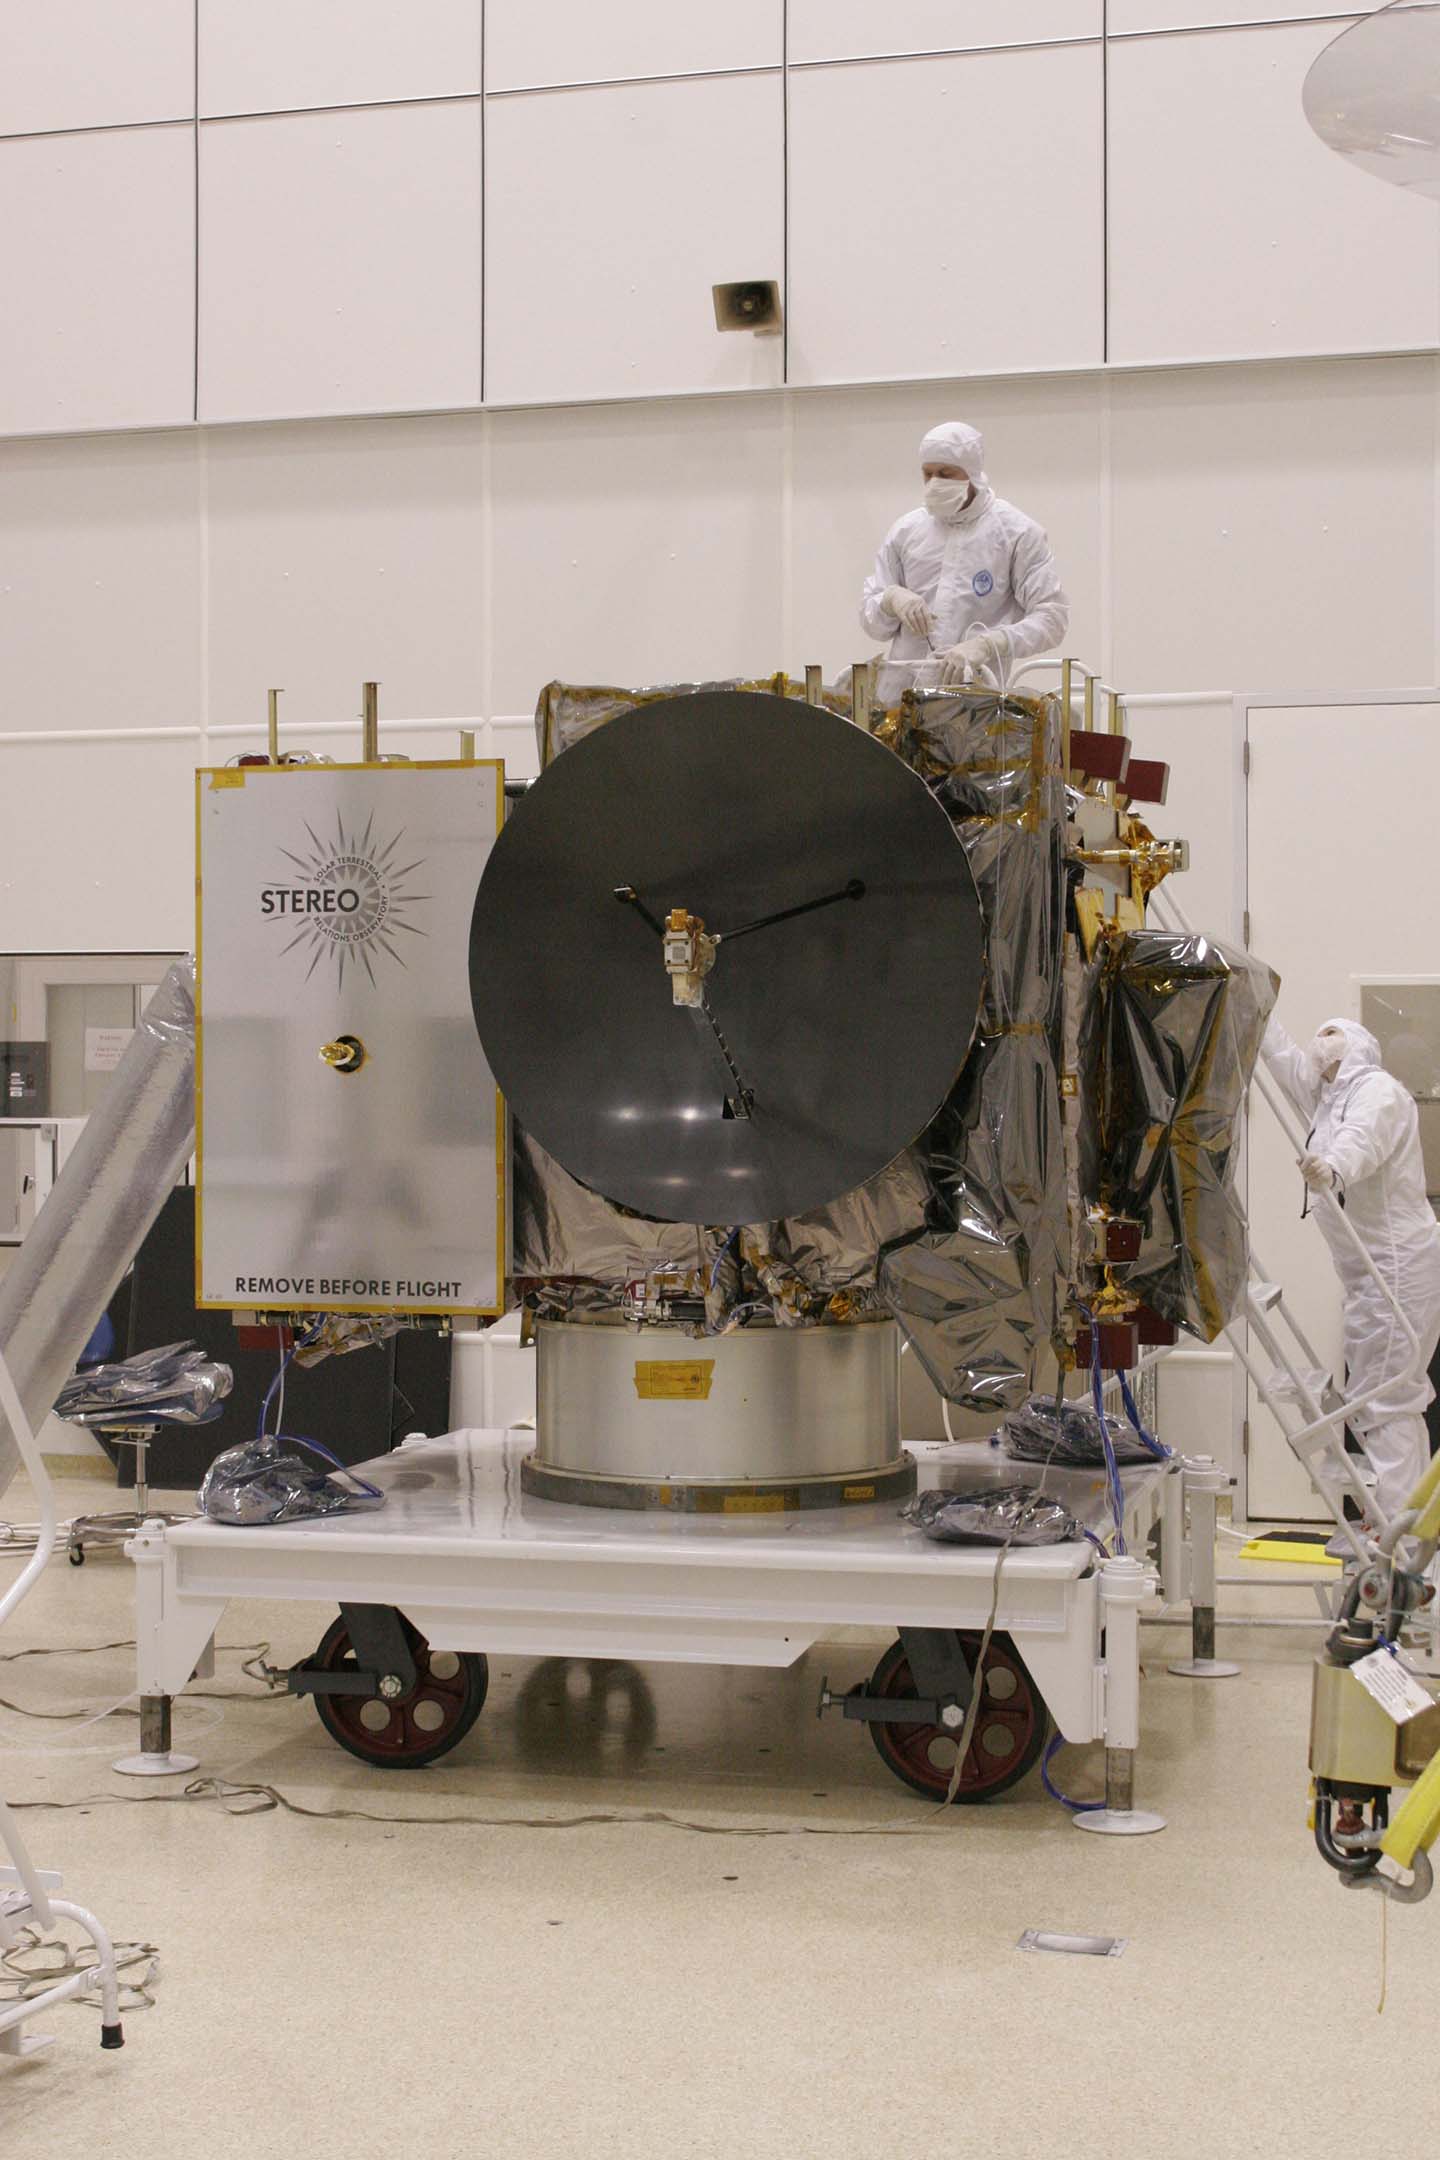 STEREO technicians prepare one of the twin STEREO spacecraft for transport